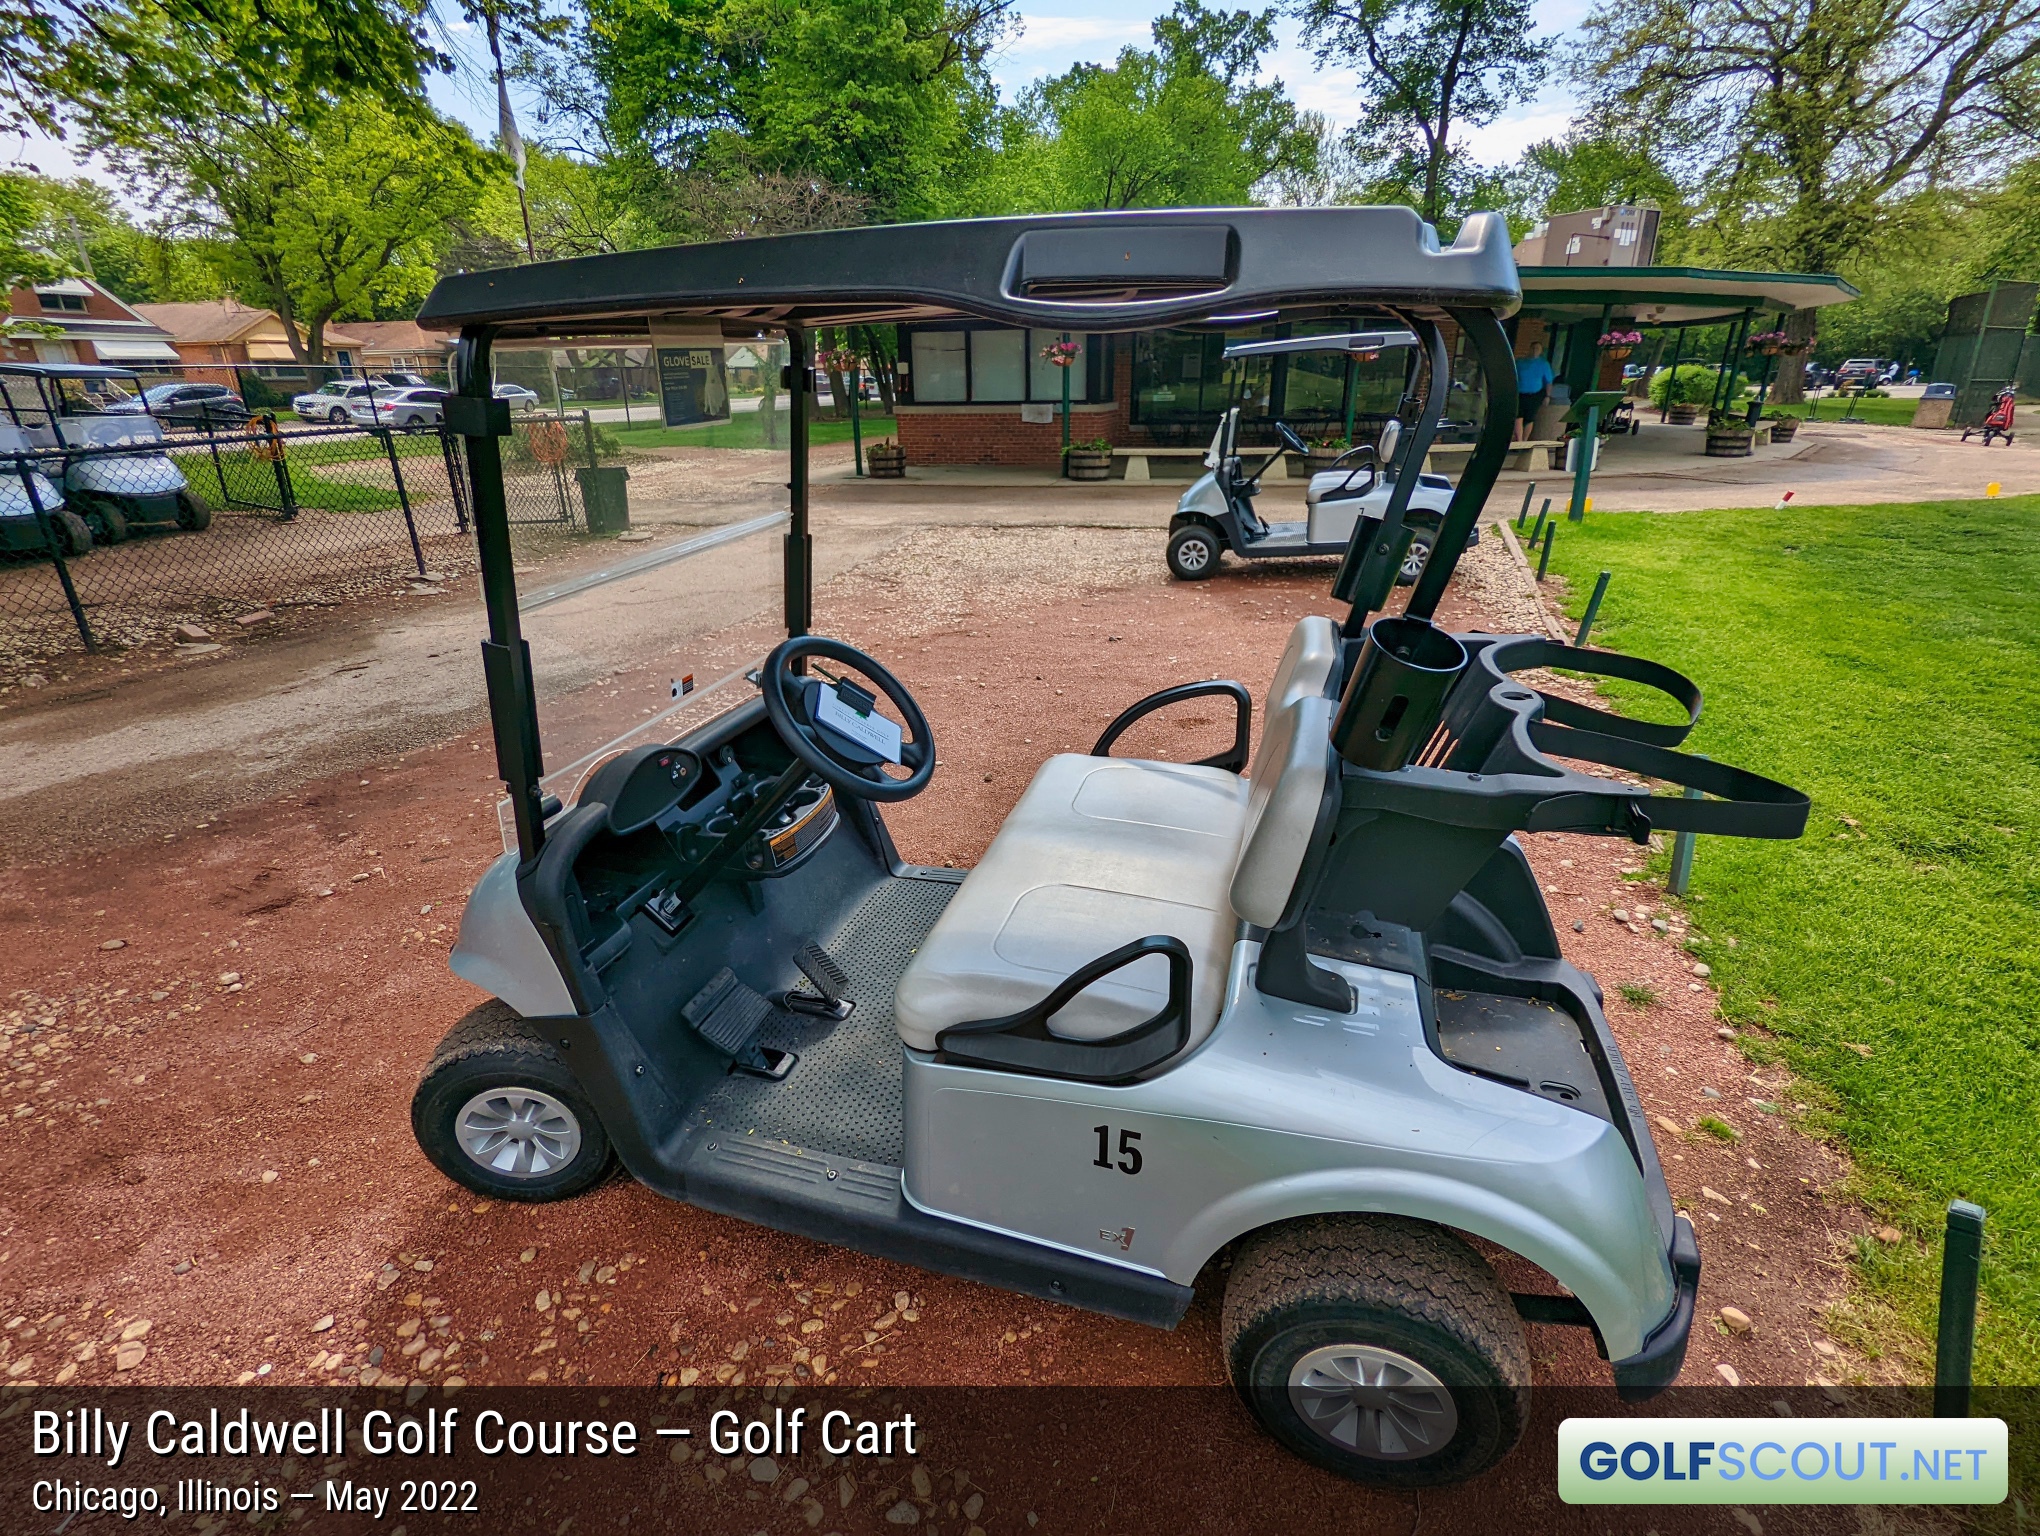 Photo of the golf carts at Billy Caldwell Golf Course in Chicago, Illinois. Most courses have the boring beige color carts. These looks pretty sweet IMHO.